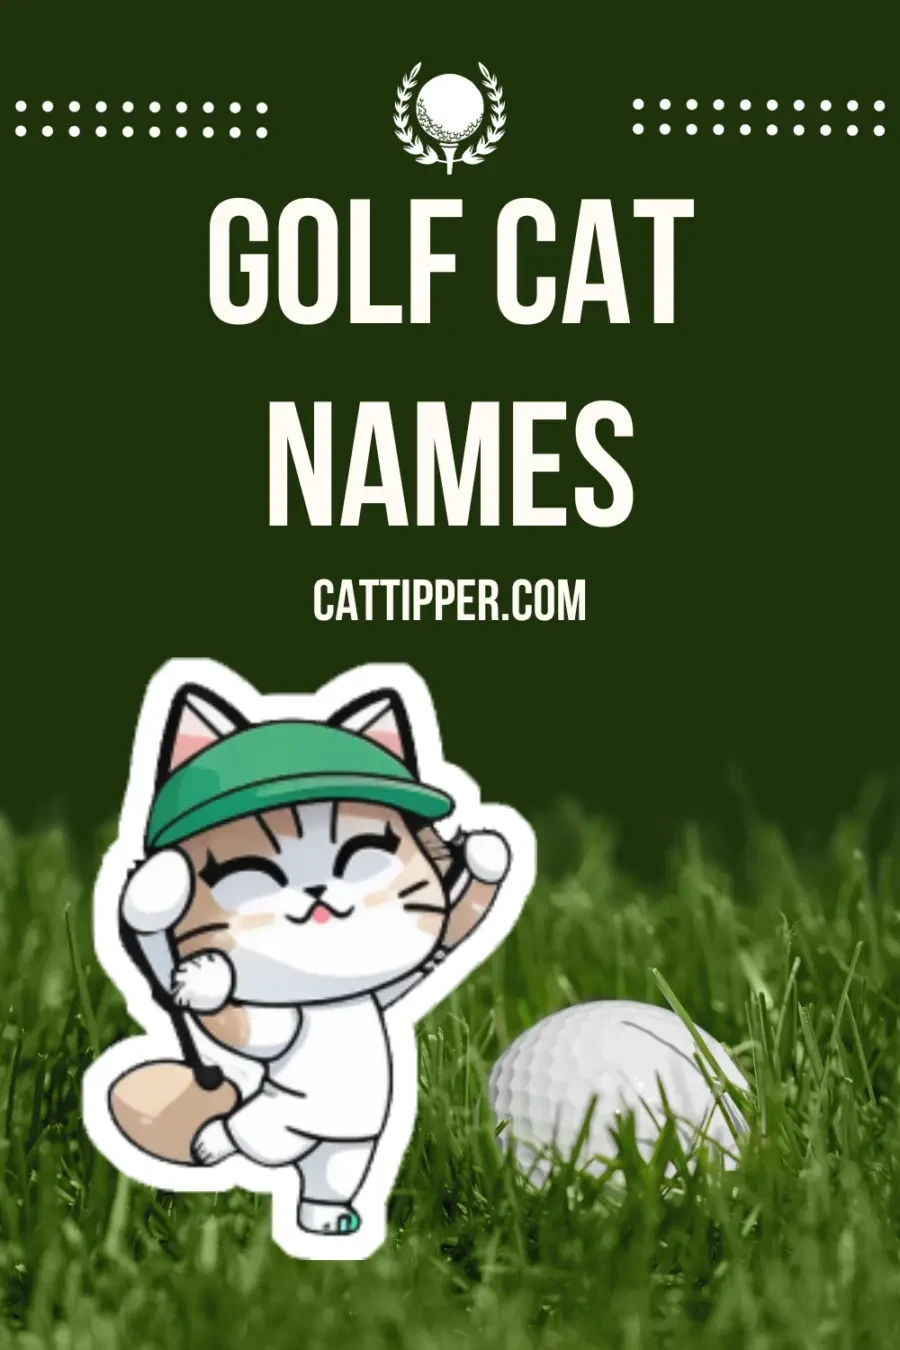 vertical image about golf cat names showing cartoon of cat playing golf